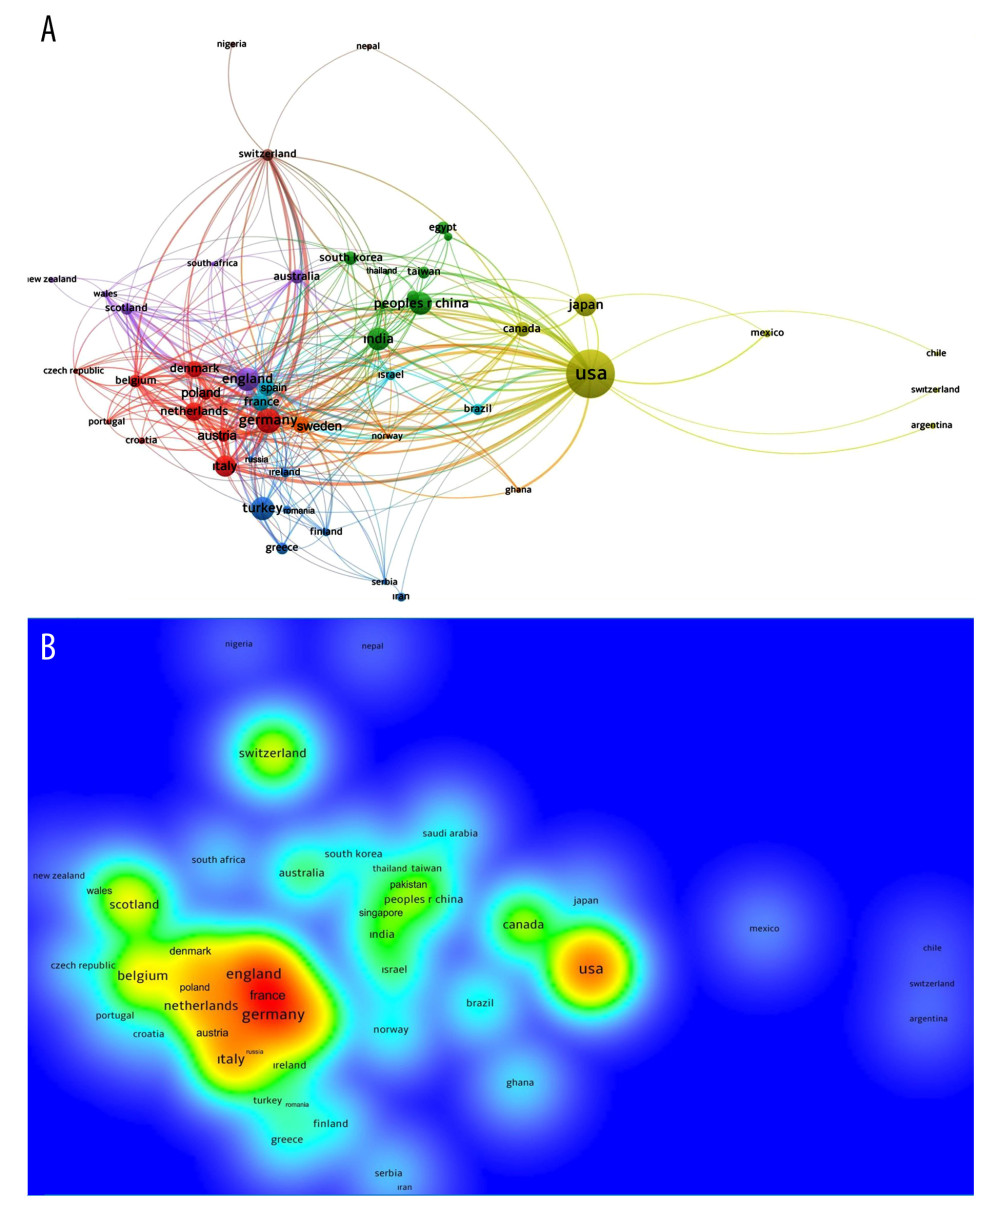 (A) Network visualization map of cluster analysis showing cooperation between countries on inguinal hernia. Colors indicate clustering. The size of the circle indicates the large number of articles. The larger the size of the circle, the more articles the country publishes. Created by VOSviewer (version 1.6.16, Leiden University’s Center for Science and Technology Studies). (B) Density map showing the intensity of international cooperation of countries on inguinal hernia. The strength of international collaboration score increases from blue to red (blue-green-yellow-red). Created by VOSviewer (version 1.6.16, Leiden University’s Center for Science and Technology Studies).